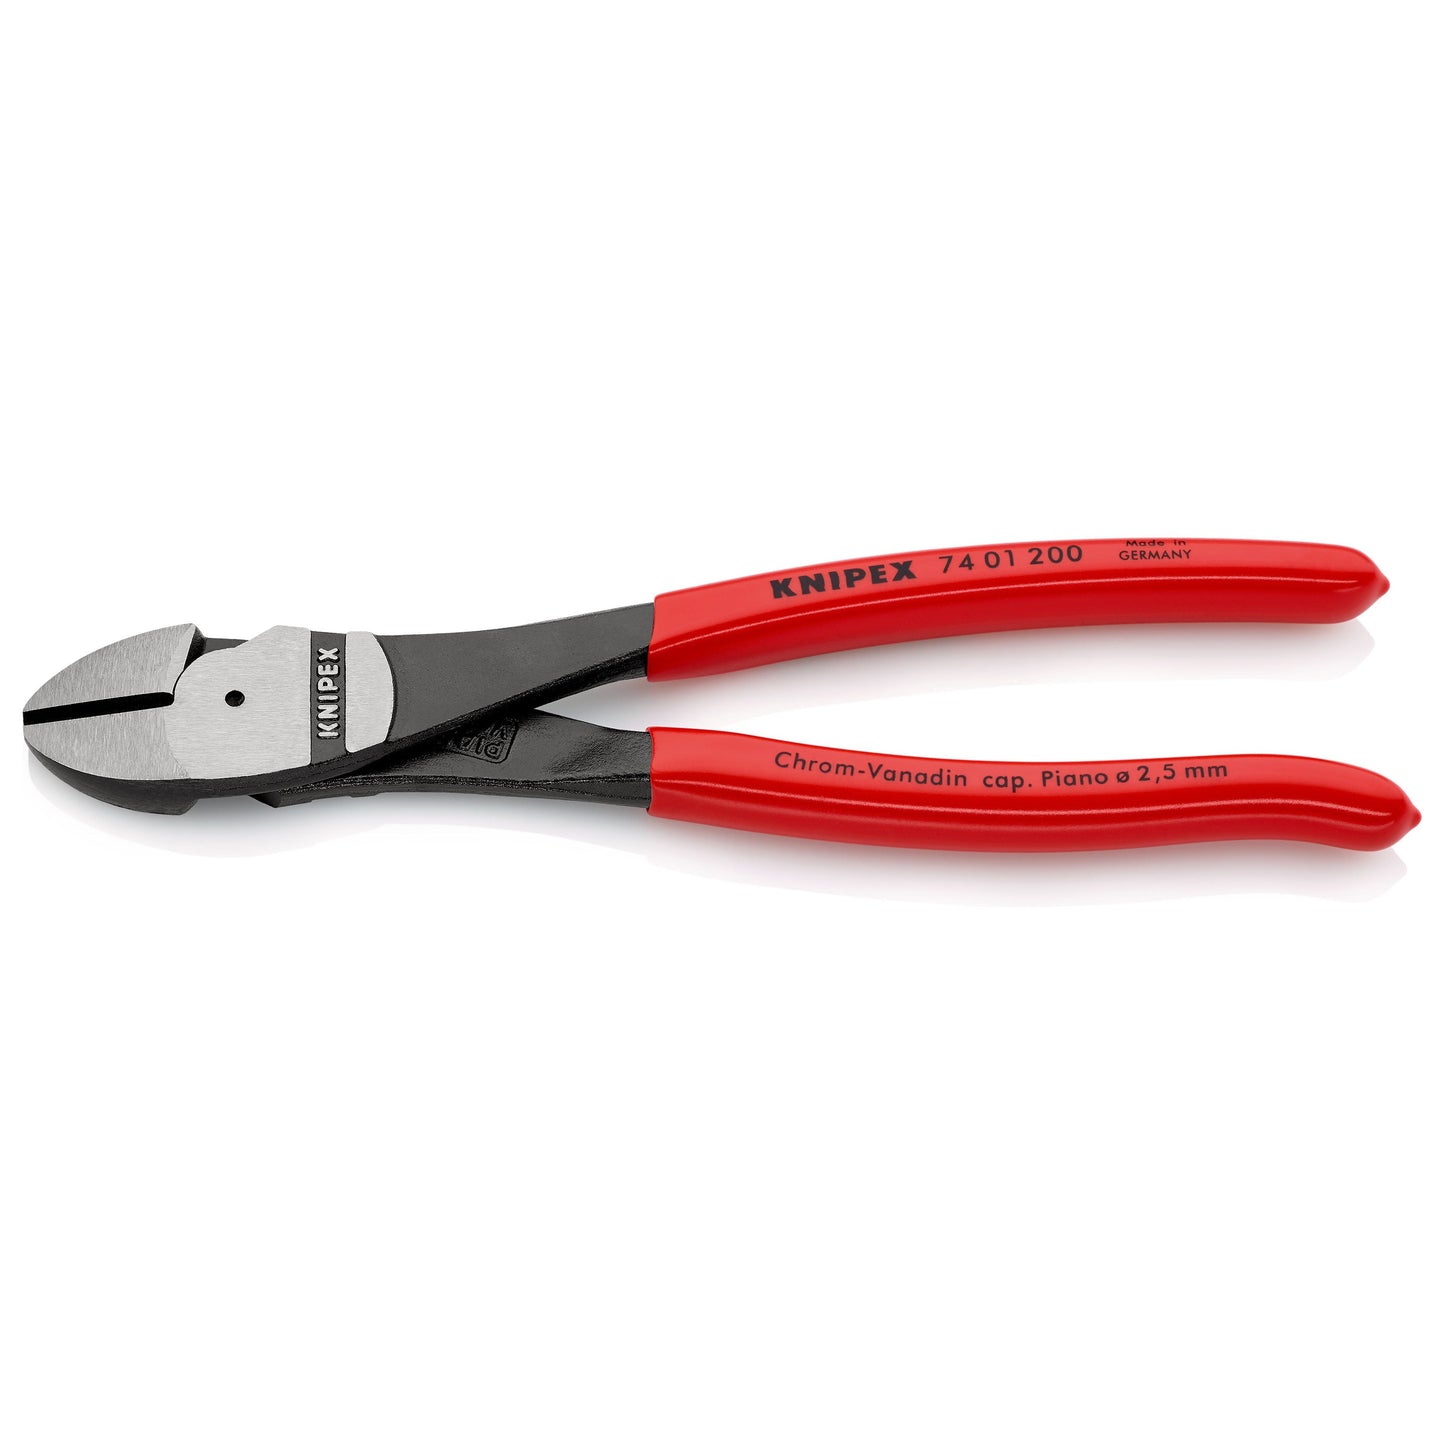 Knipex 74 01 200 - 200 mm force diagonal cutting pliers with PVC handles